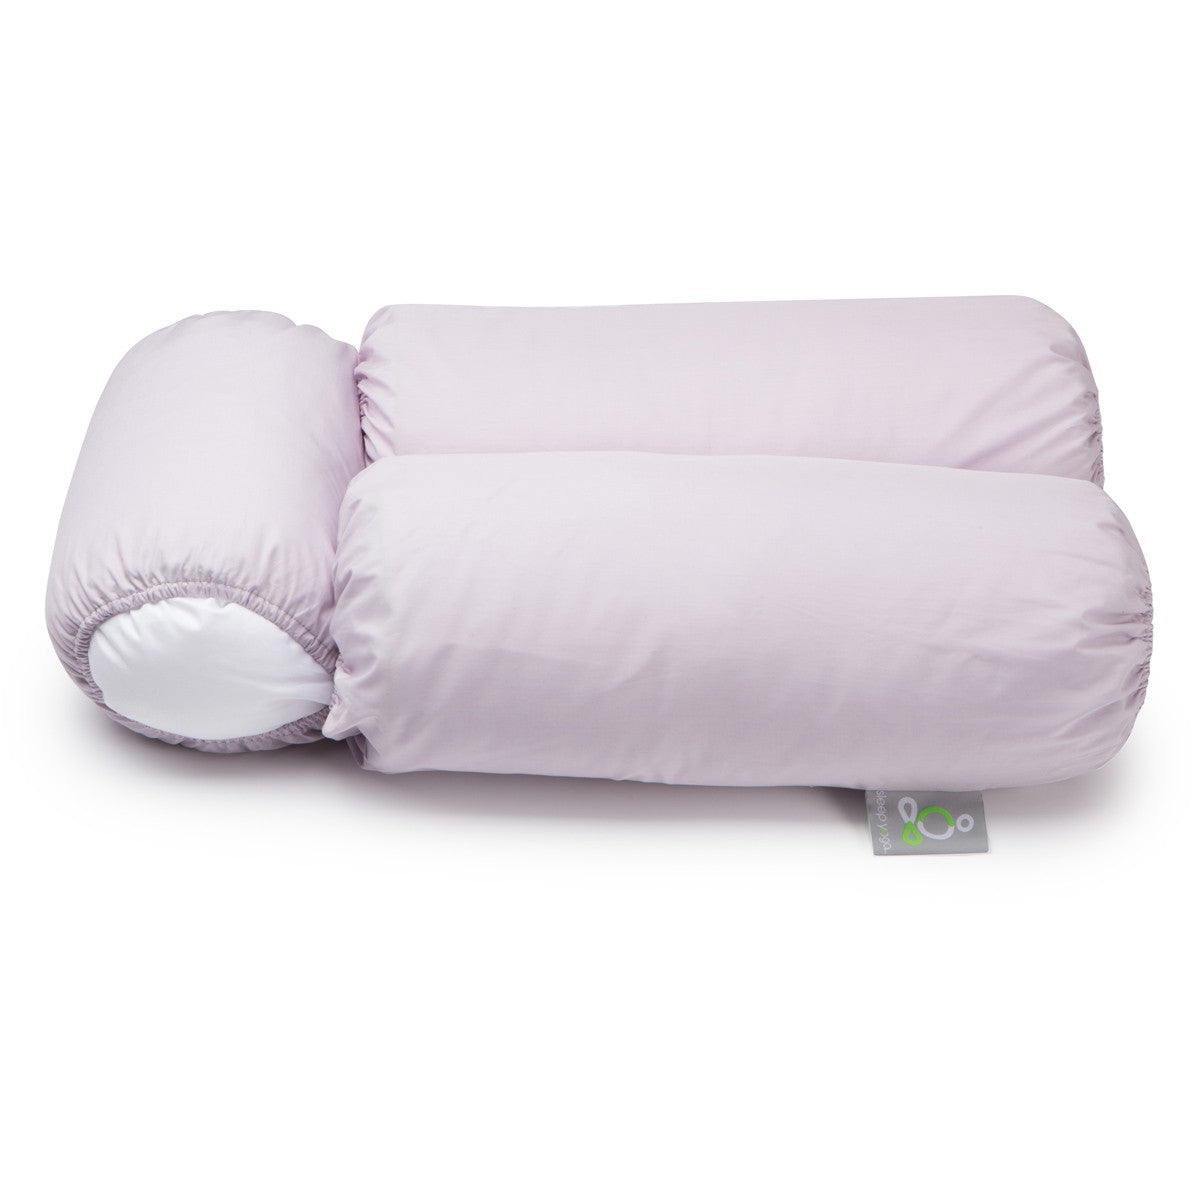 2 Pack Pillow Covers For Multi-Position Body Pillow